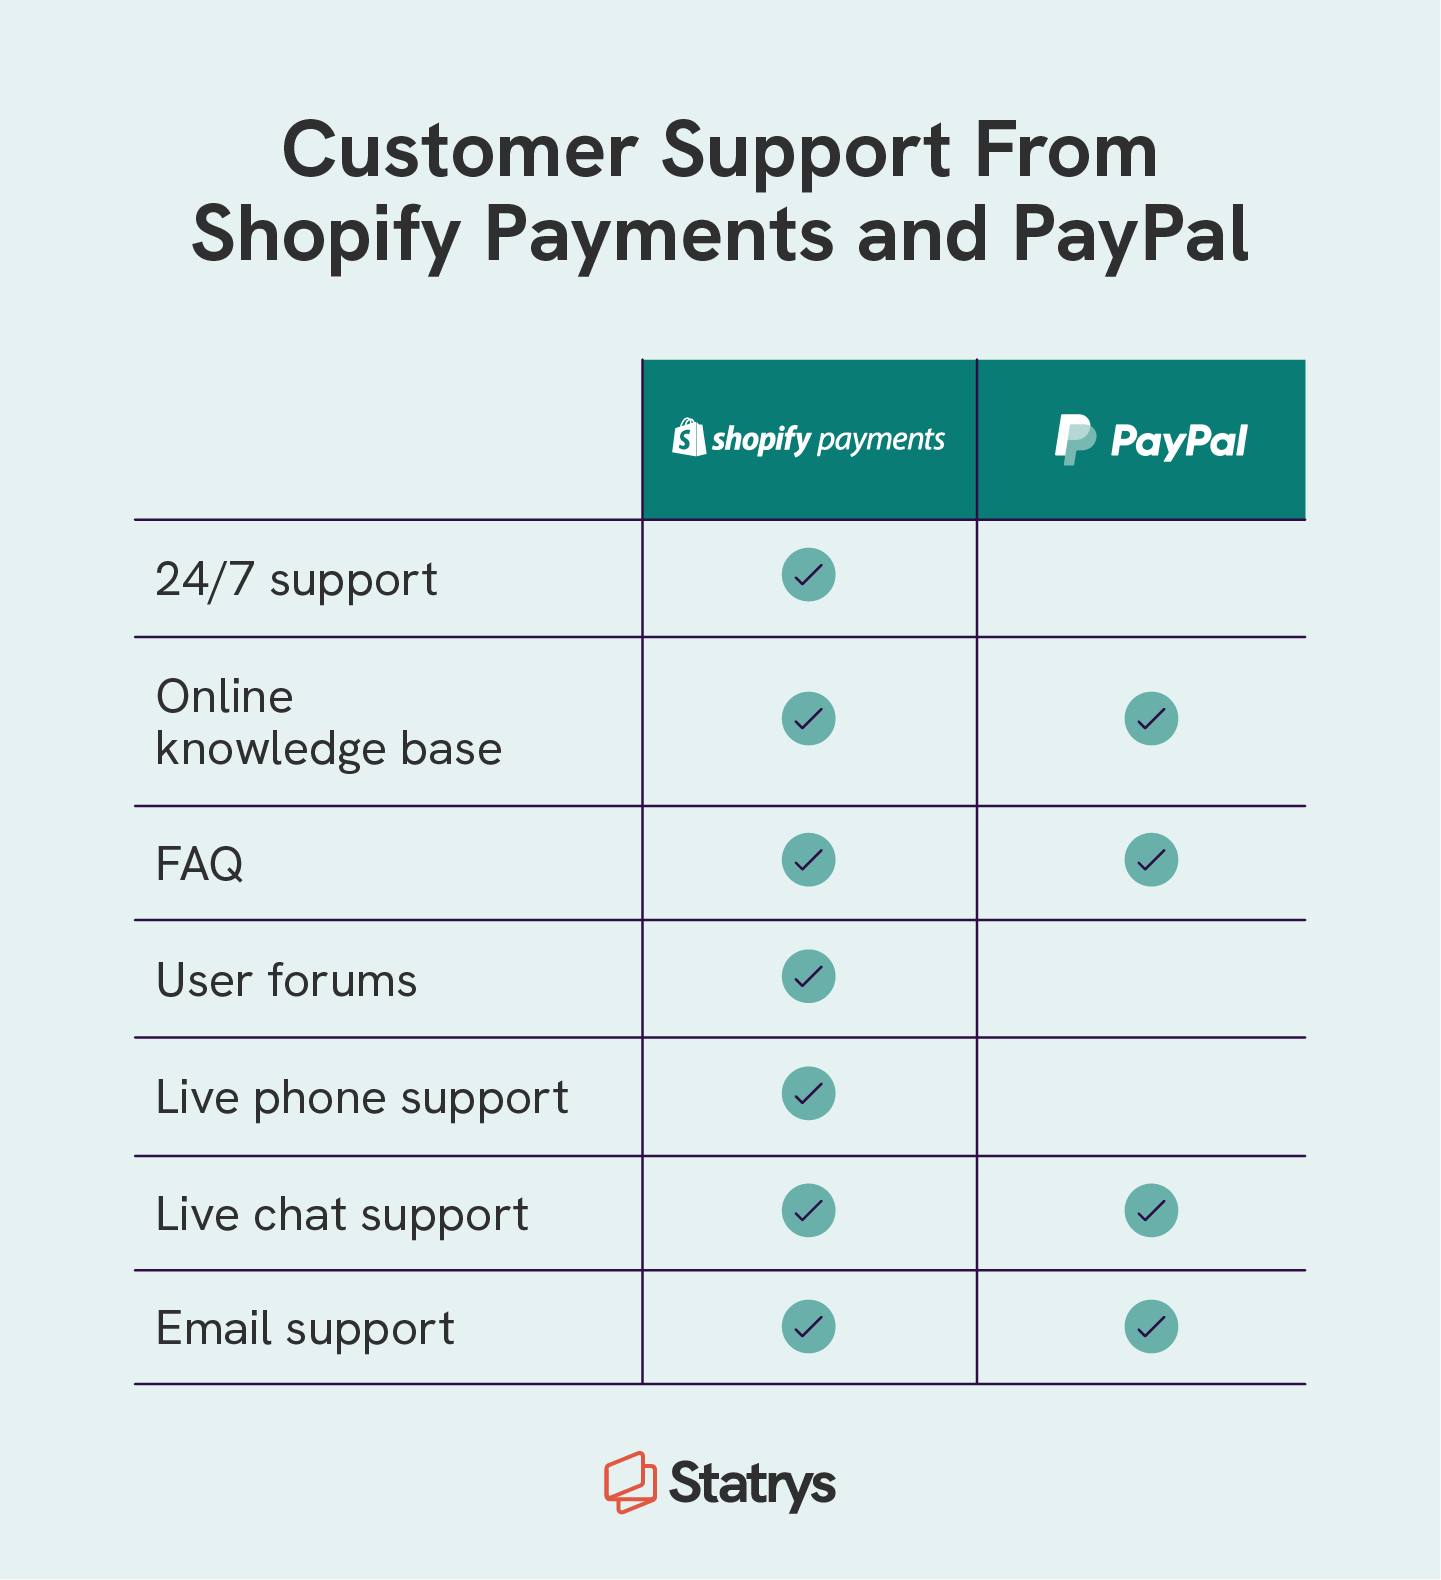 Chart that covers the customer support offered by Shopify Payments and PayPal, including 24/7 support, online knowledge bases, FAQ, forums, live phone and chat support, and email support.